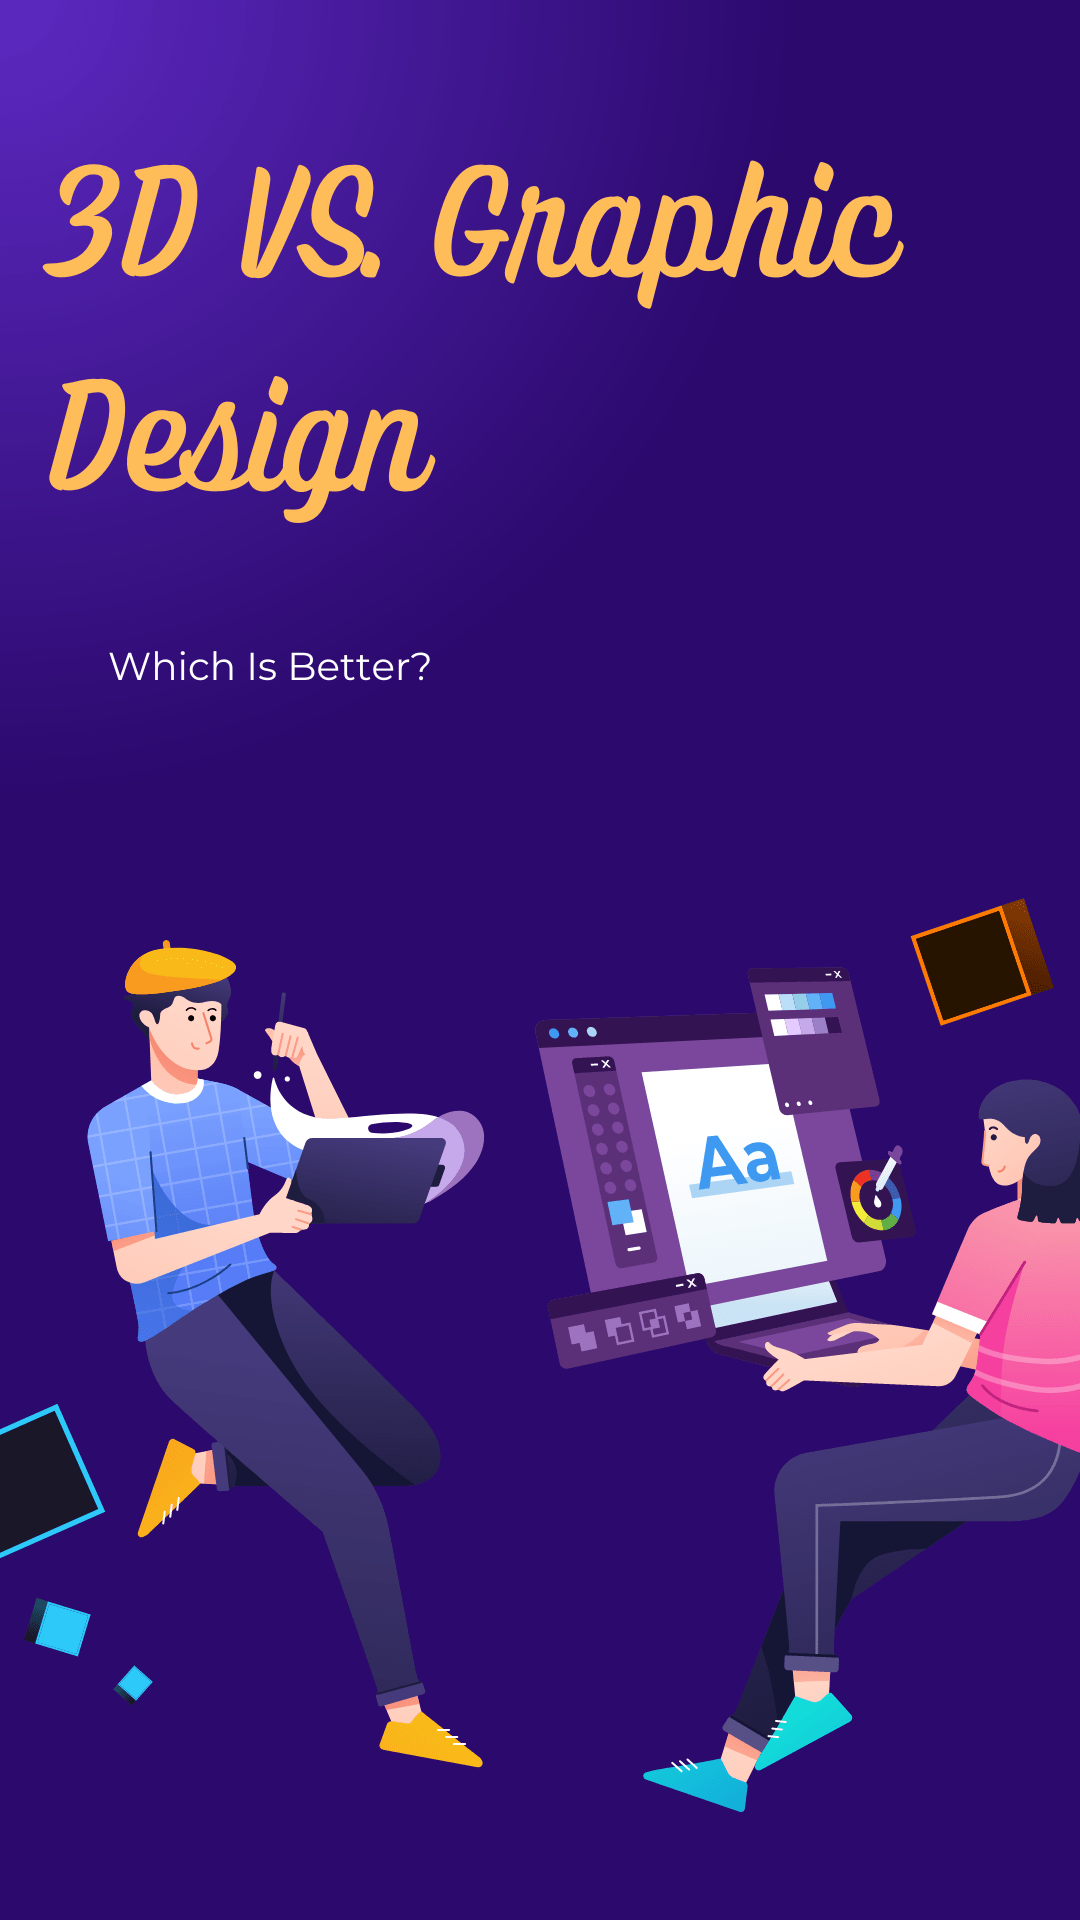 Image shows a blue background with orange words that read: 3D VS Graphic Design, which is better?" It also shows two cartoon people, one is painting where another is working on computer art.